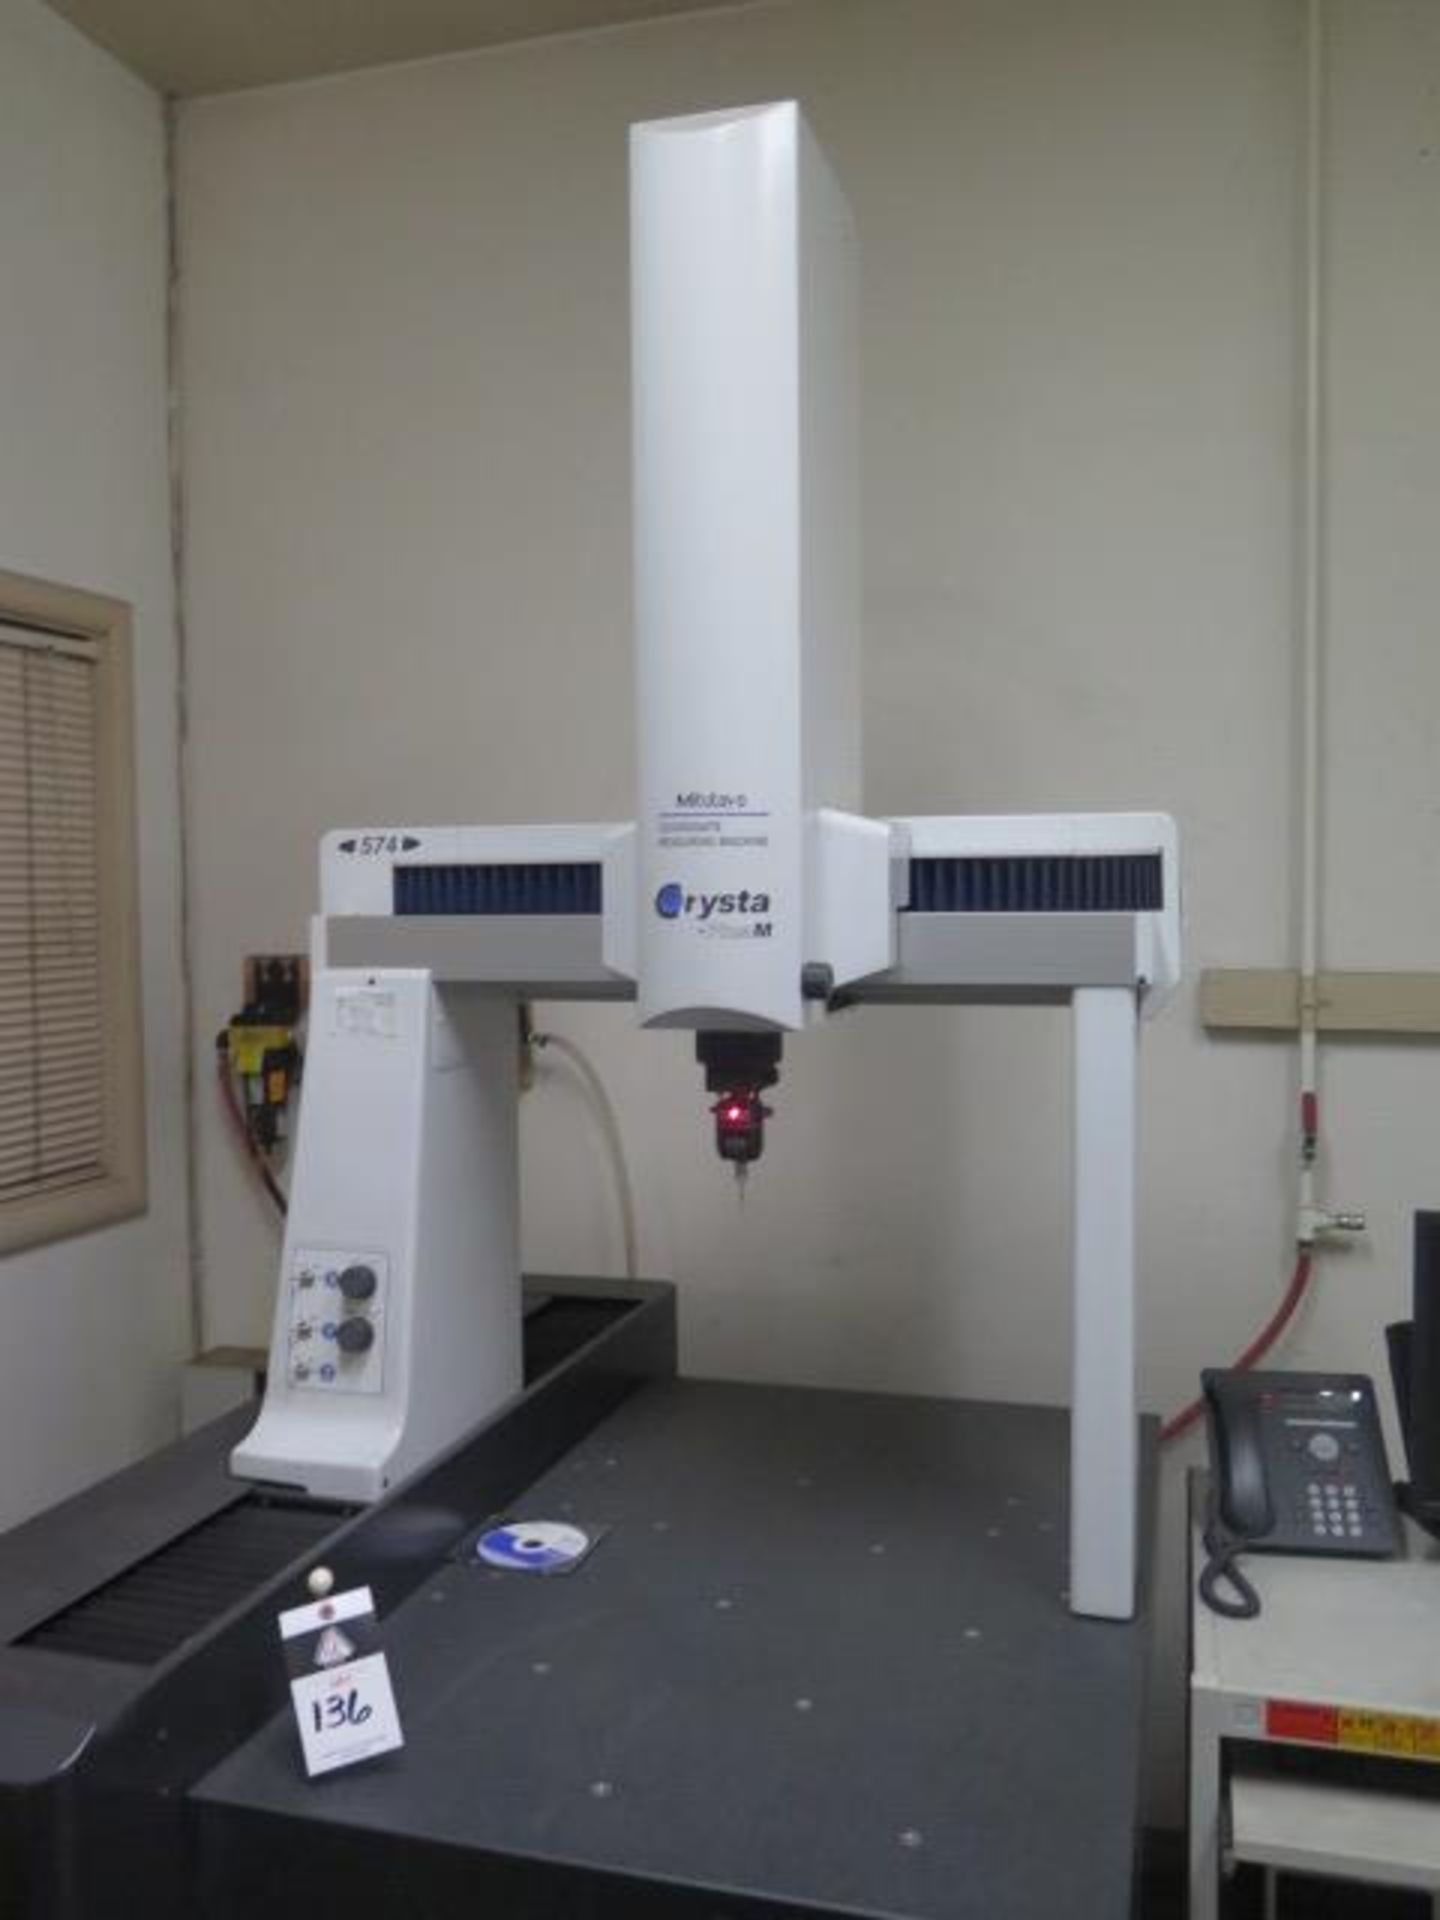 Mitutoyo Crysta-PlusM 574 CMM s/n 01568101 w/ Renishaw MH20i Probe Head, Mitutoyo MiCAT, SOLD AS IS - Image 2 of 13